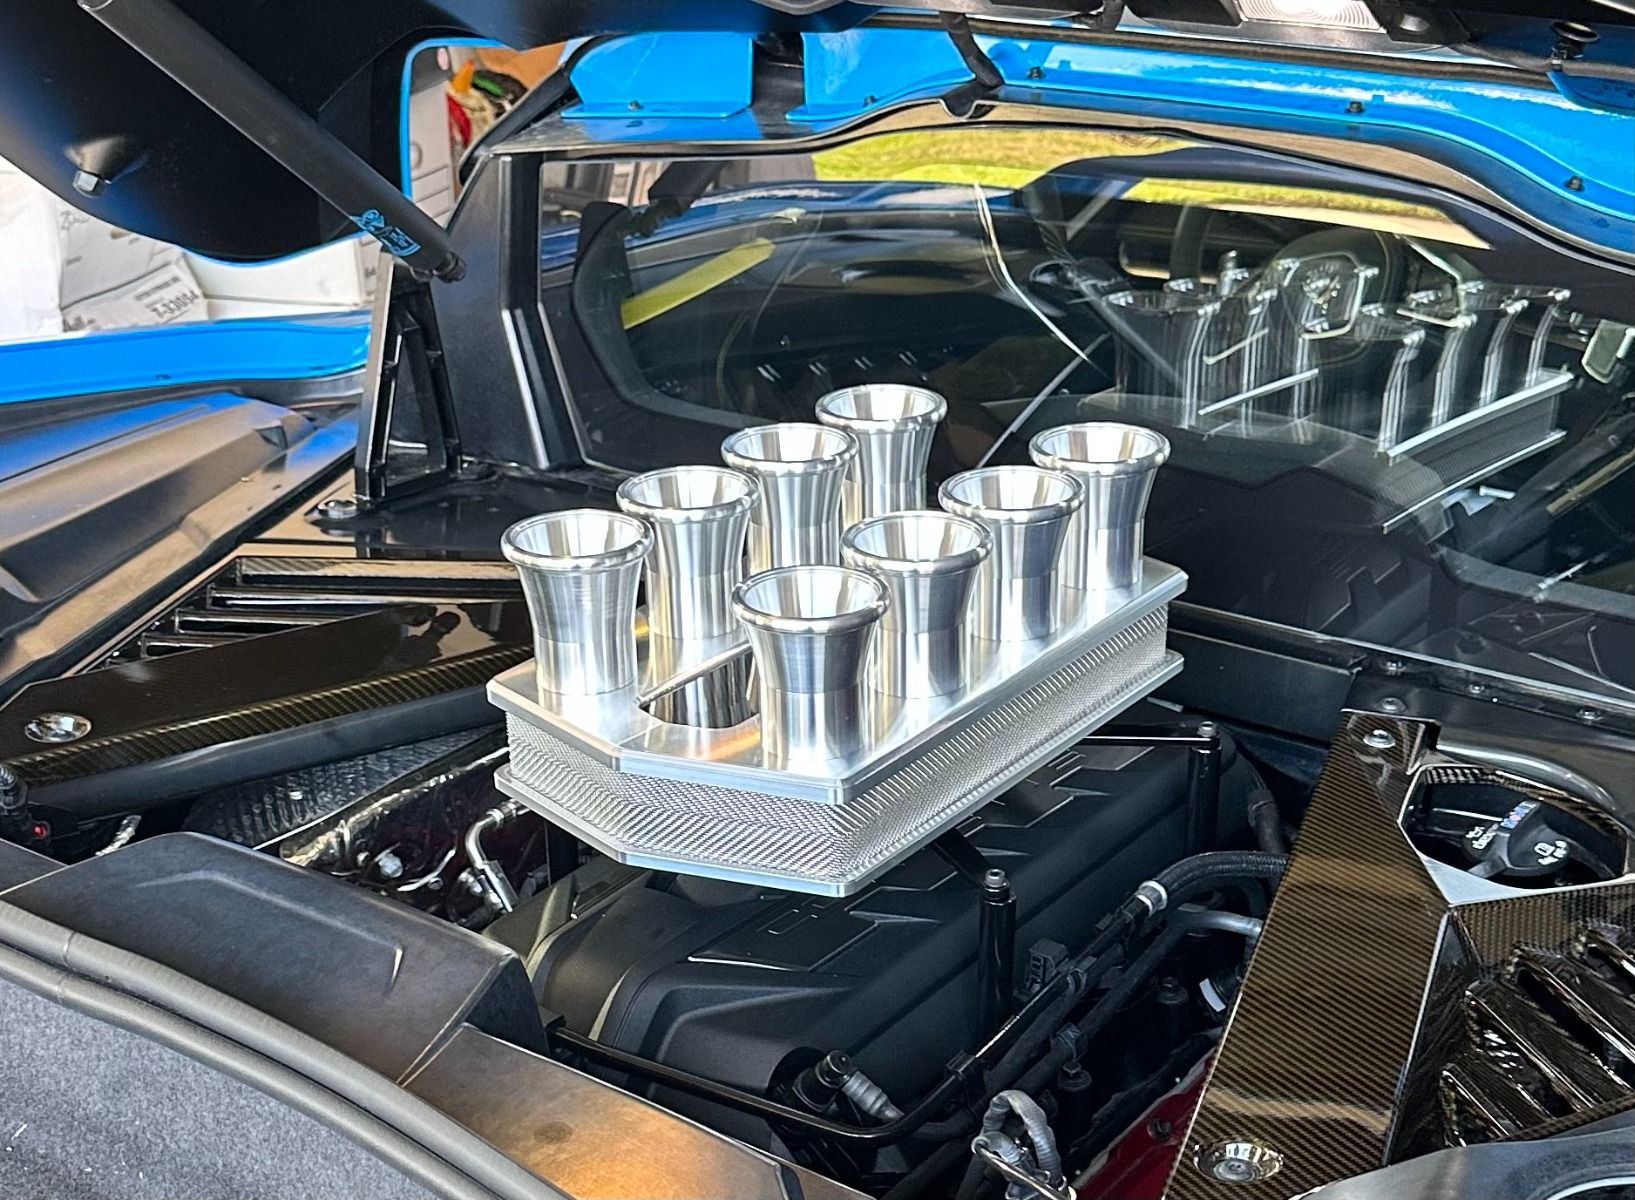 2020-23 C8 Corvette Stingray Fuelie Engine Cover, Retro style stacked injection engine cover